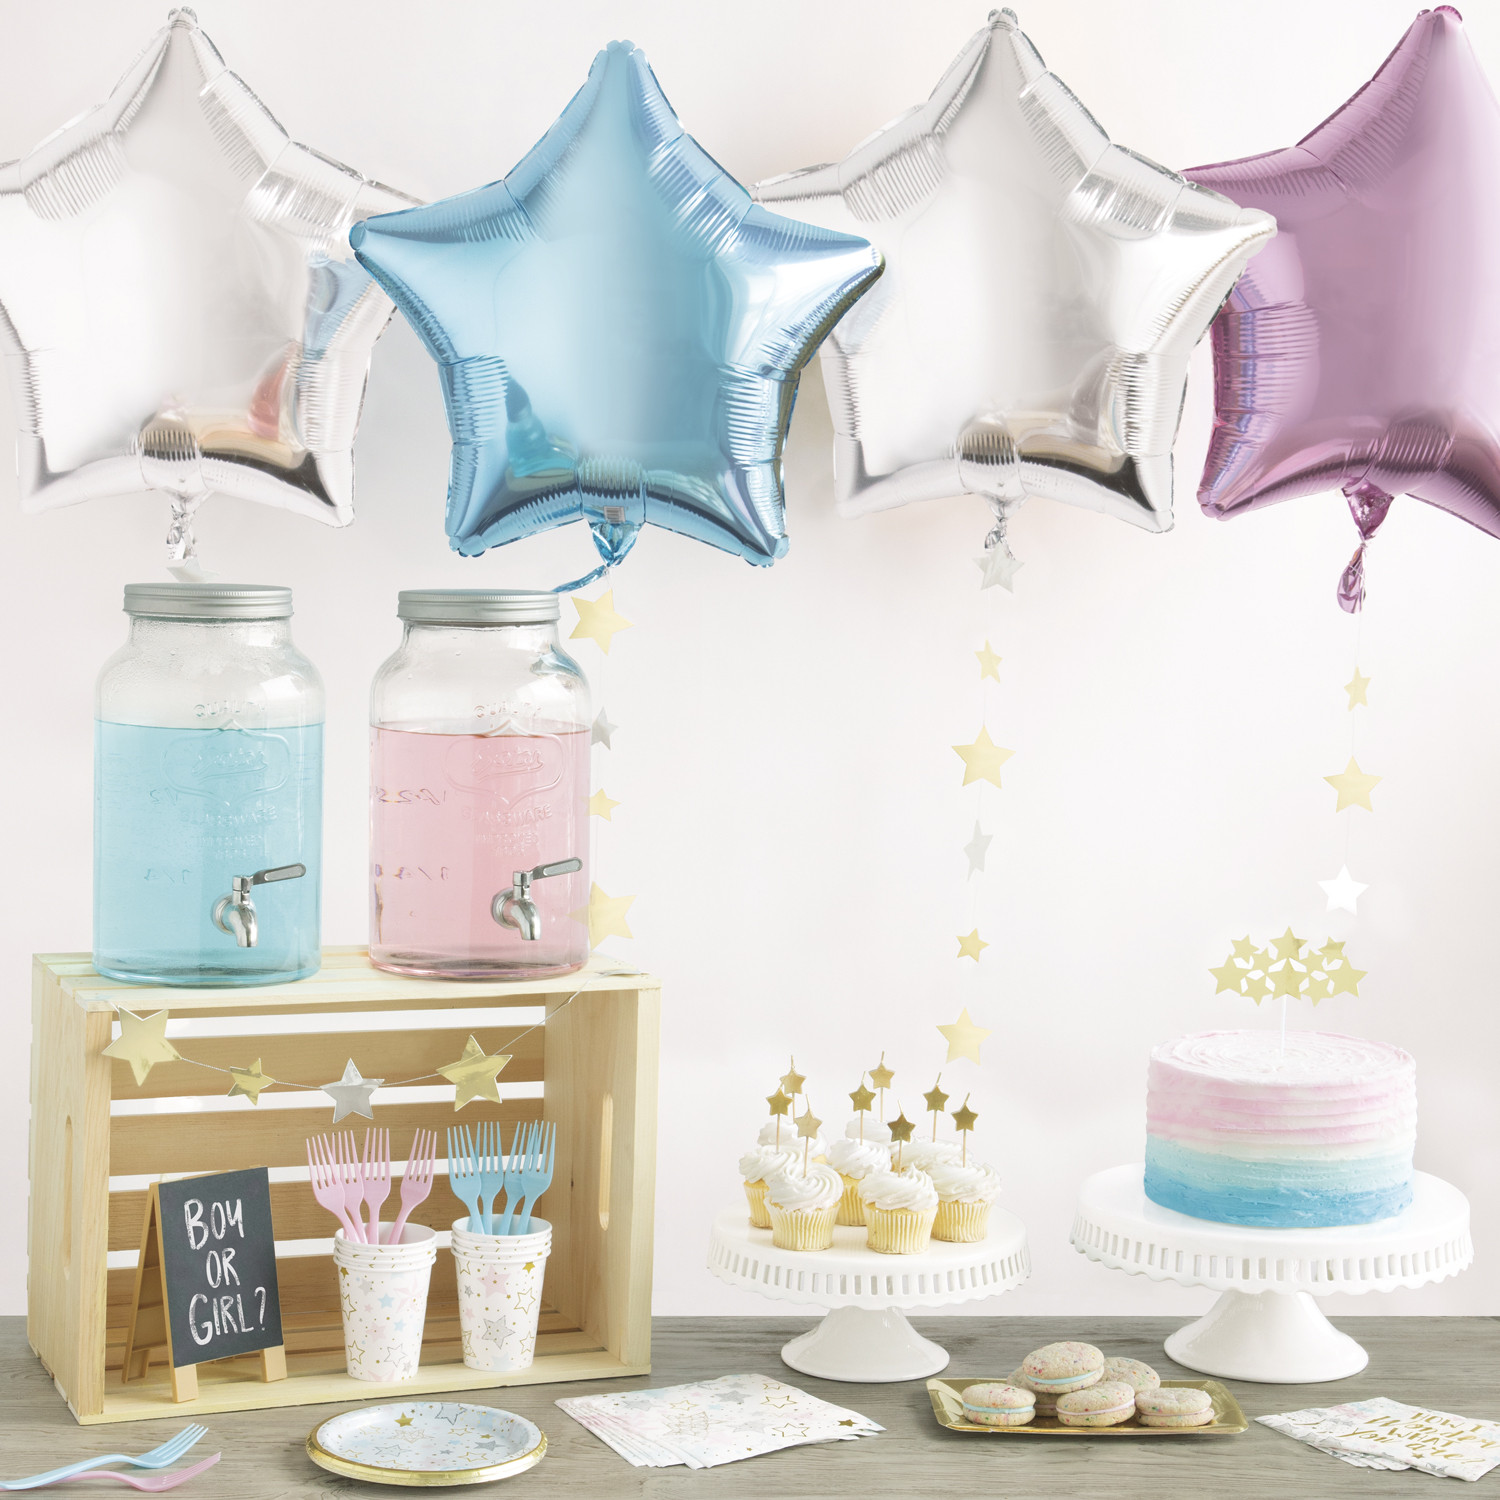 Gender Party Ideas
 Gender Reveal Party Ideas